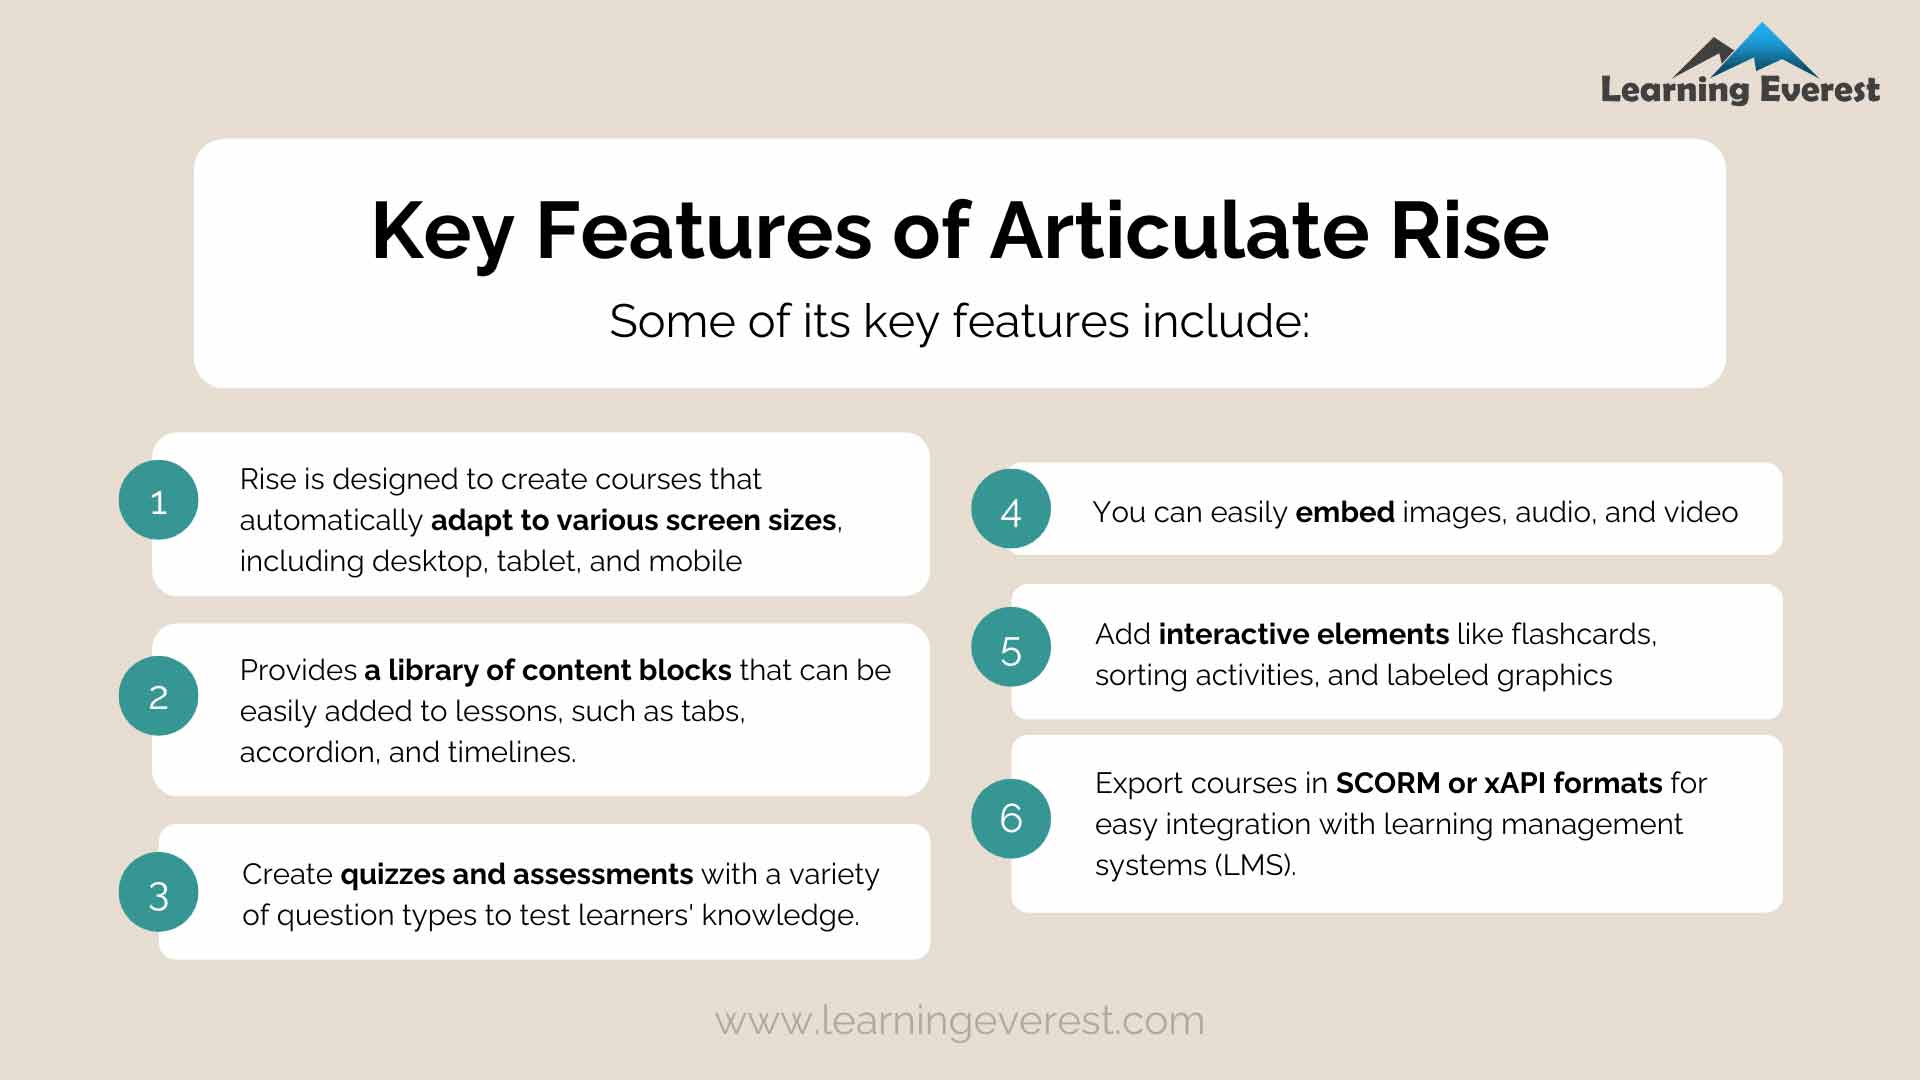 Key Features of Articulate Rise